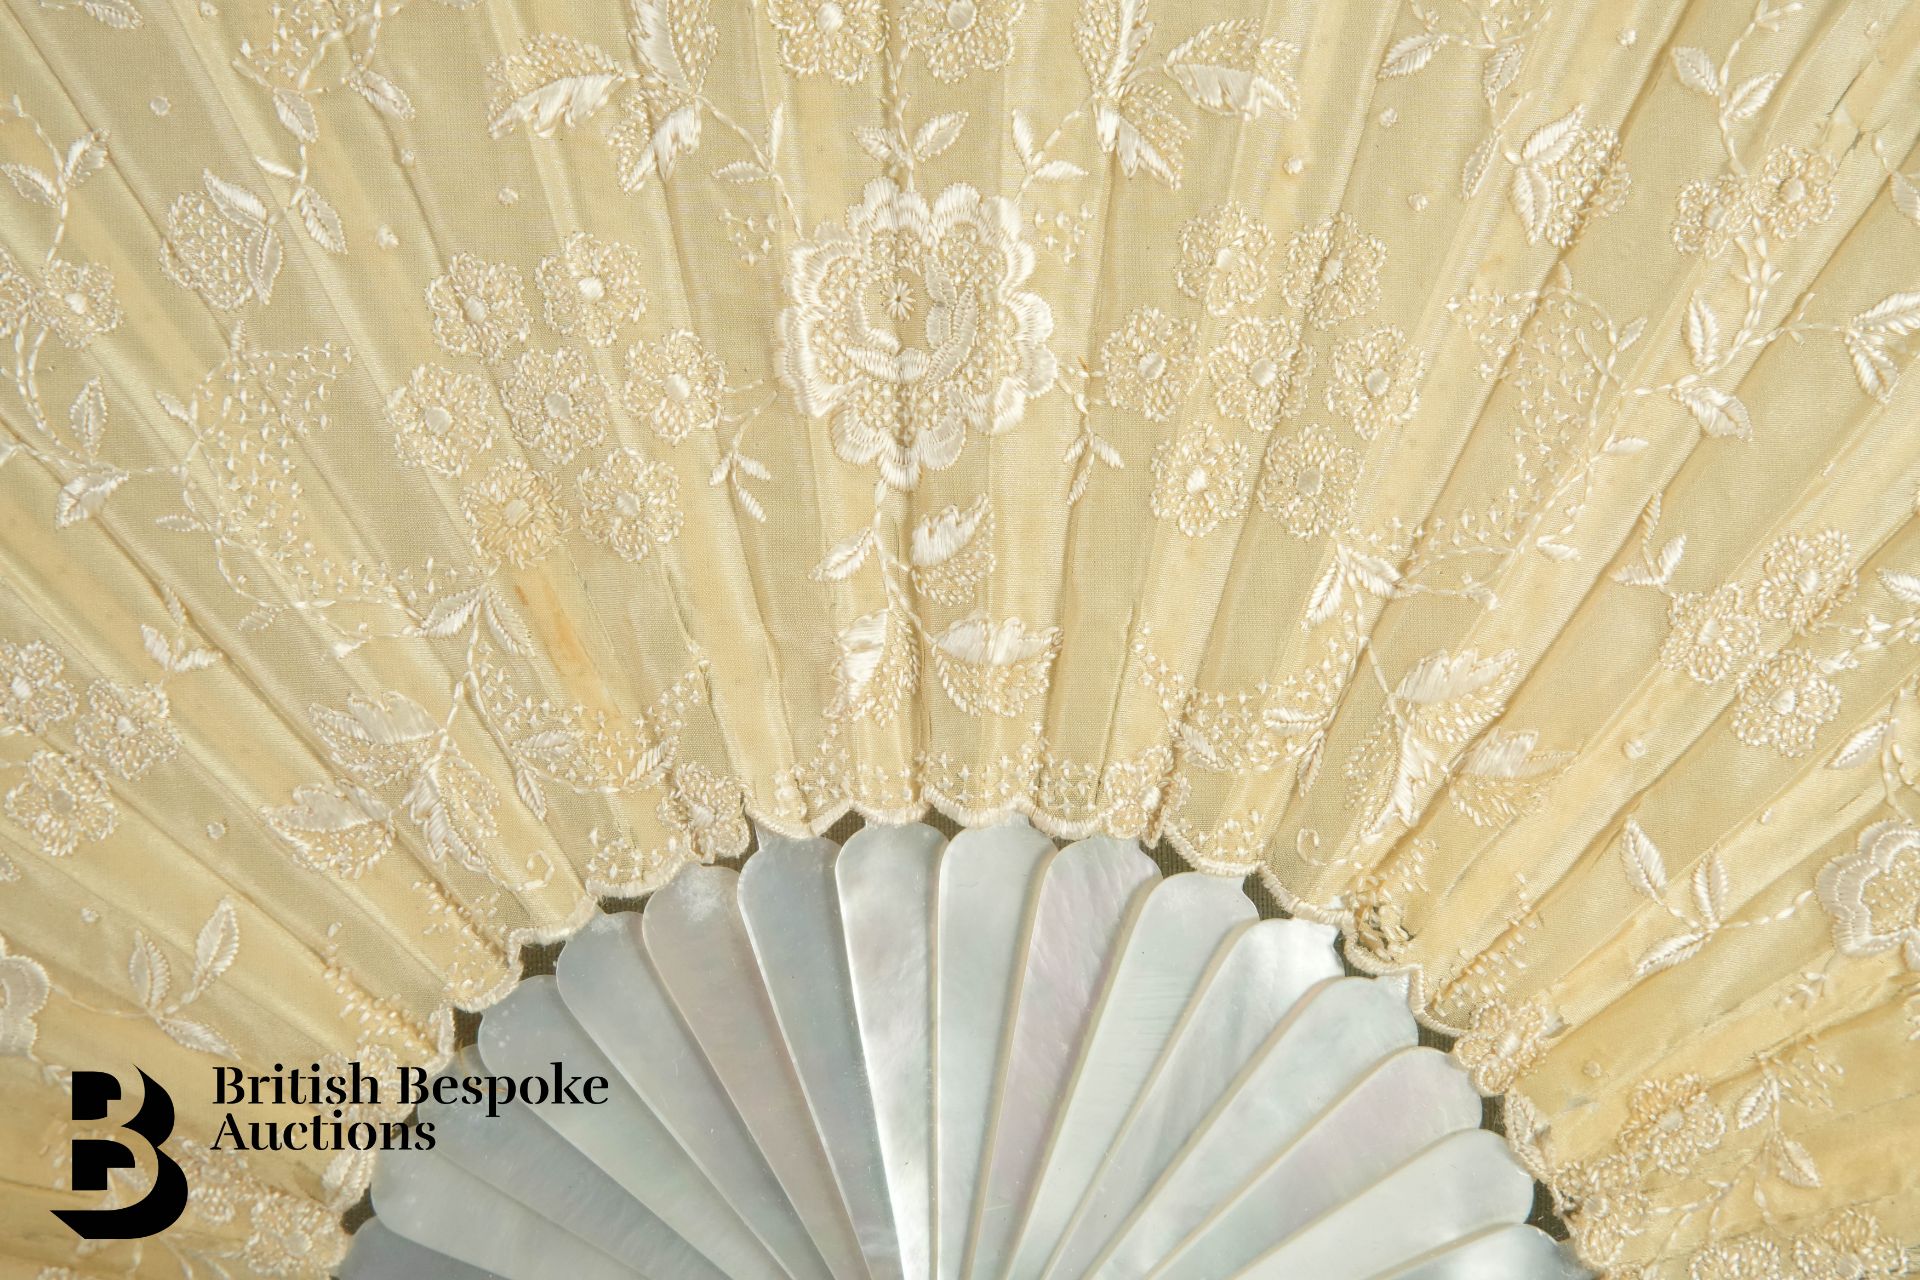 Late 19th Century Silk Embroidered Fan - Image 3 of 5